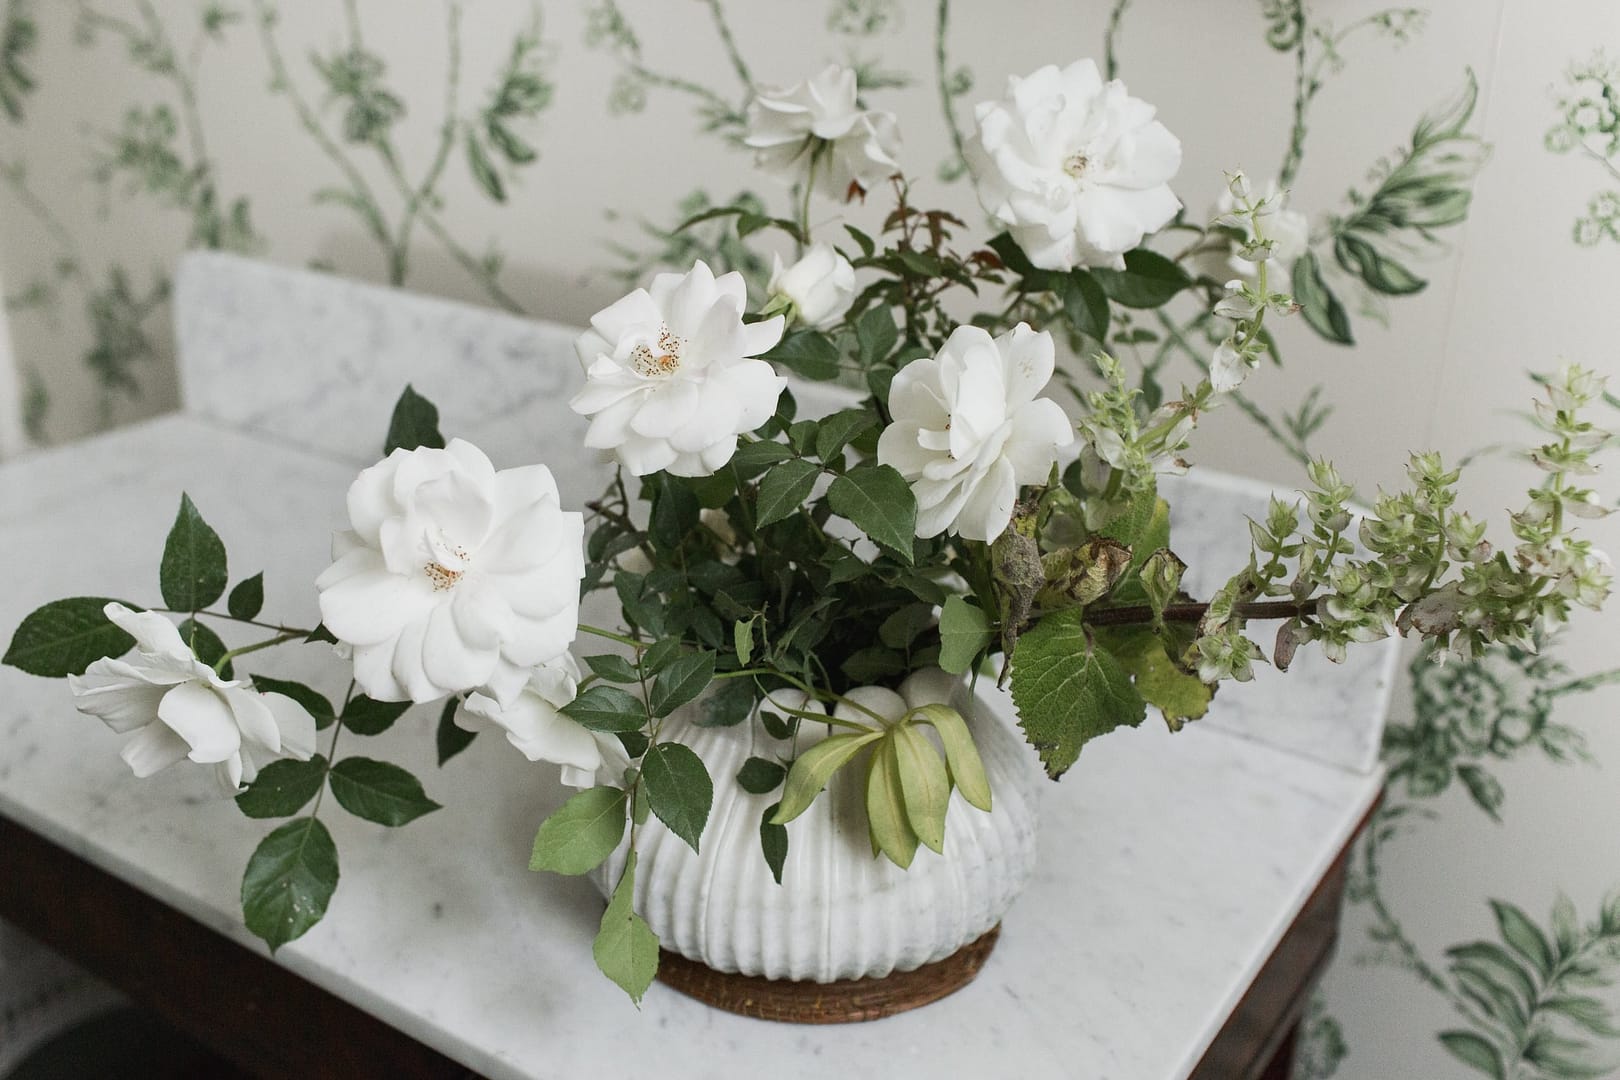 A simple summer reception centerpiece in a green and white neutral color palette atop a marble table with a marble vase featuring garden roses by Nectar and Root, Vermont wedding florist at Shelburne Museum in Shelburne, Vermont.